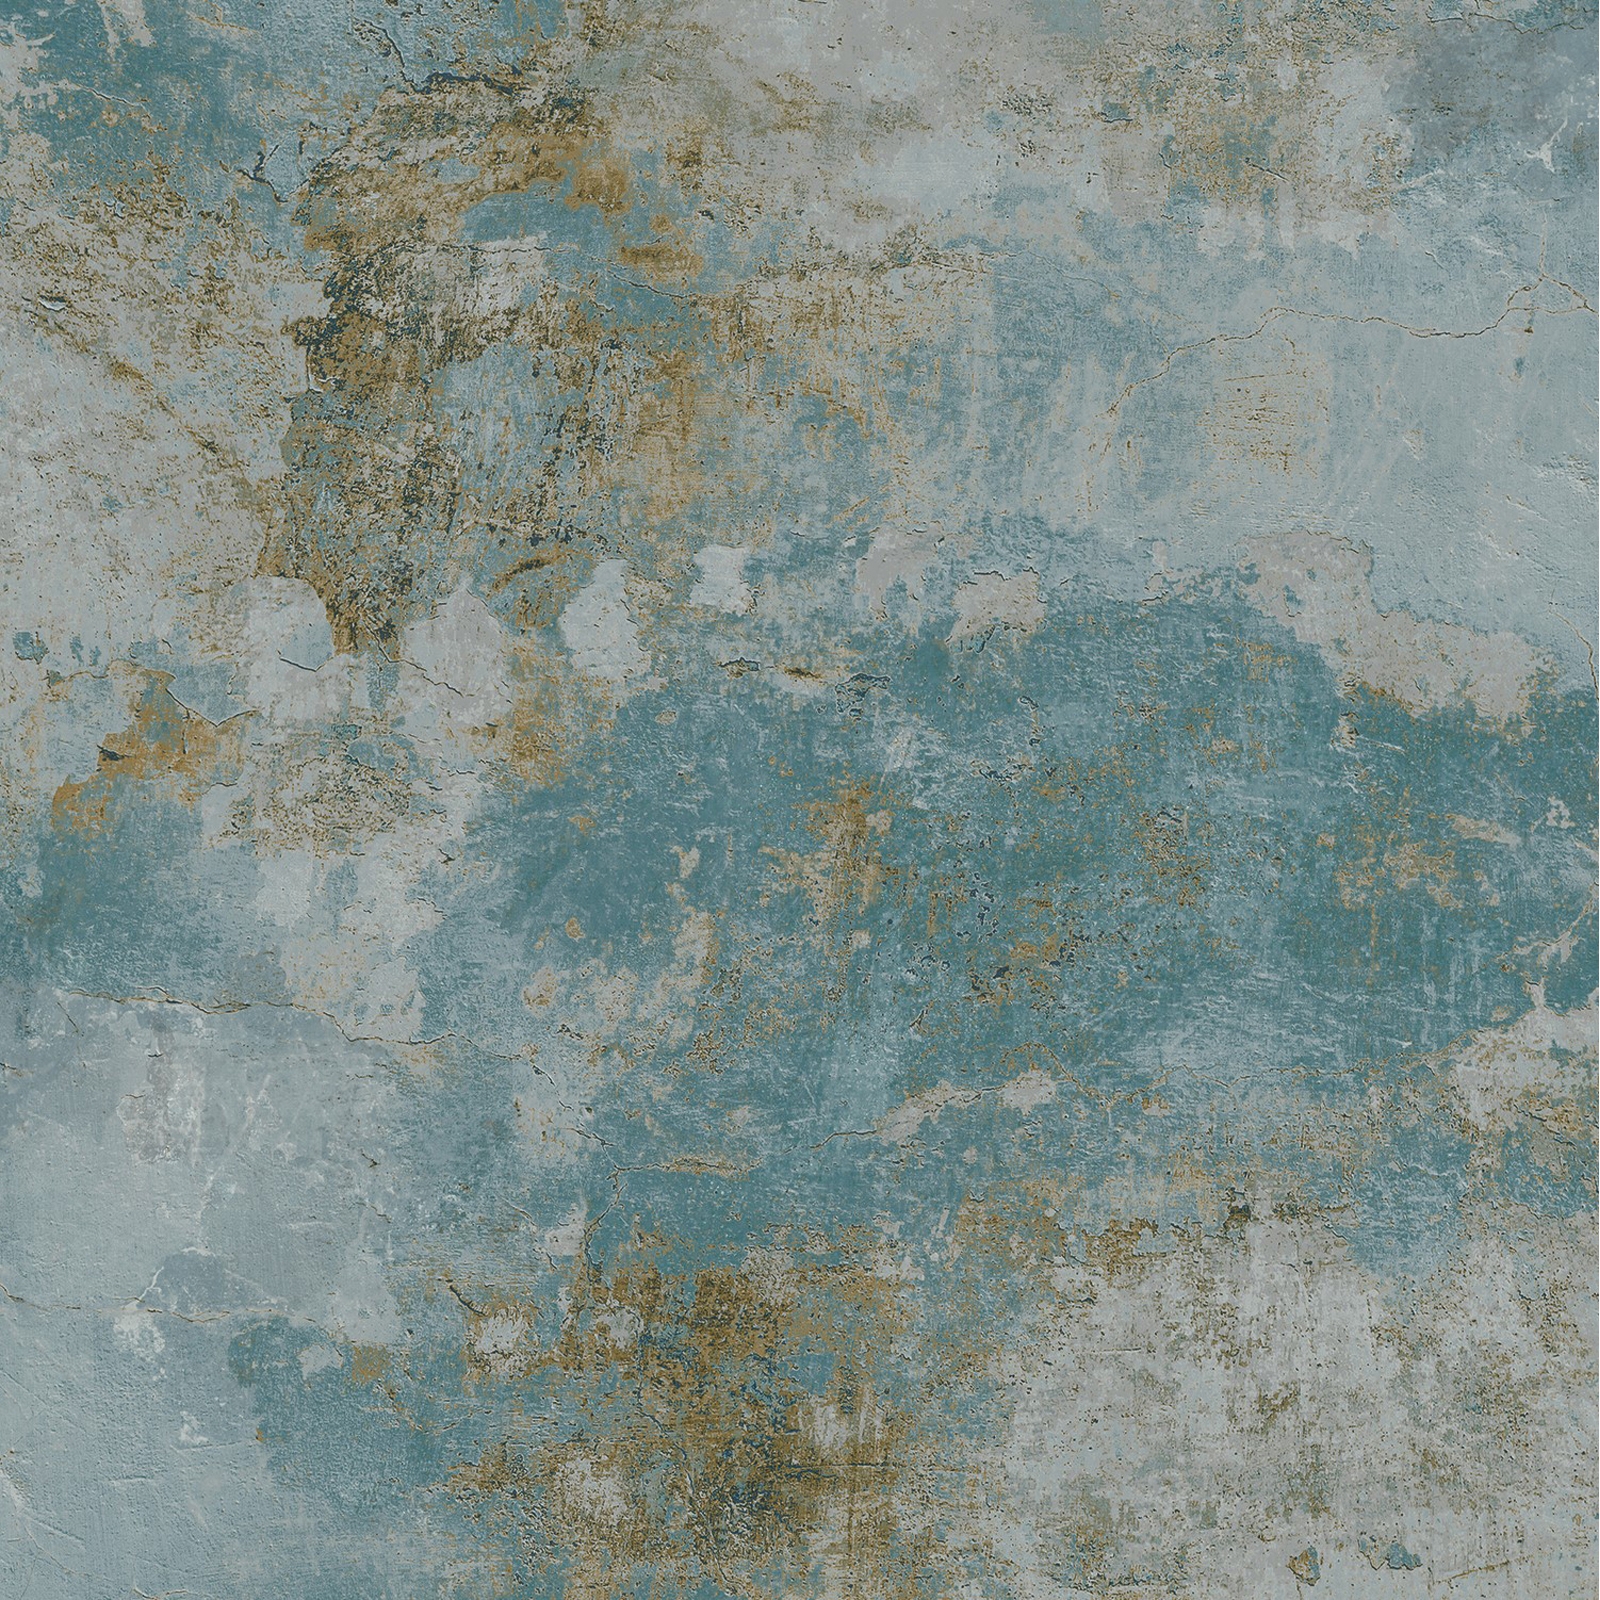 Grandeco Rustic Old Town Plaster Distressed Concrete Textured Wallpaper - Teal